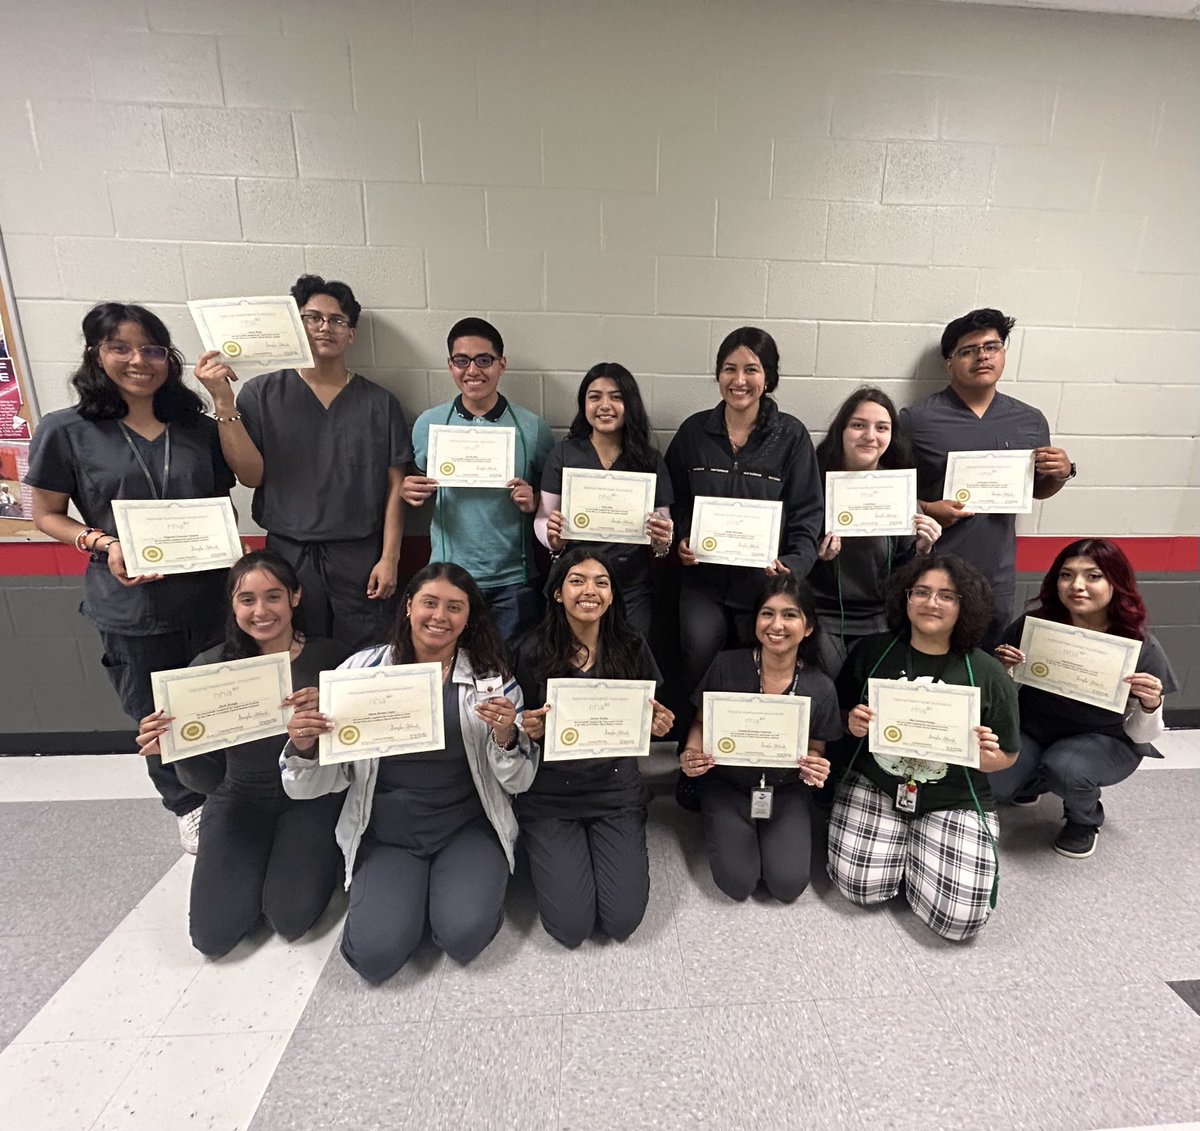 The CHS Health Science CTE department had 23 students become Certified Clinical Medical Assistants on Tuesday, May 22nd! We wish them success in their future healthcare careers!!